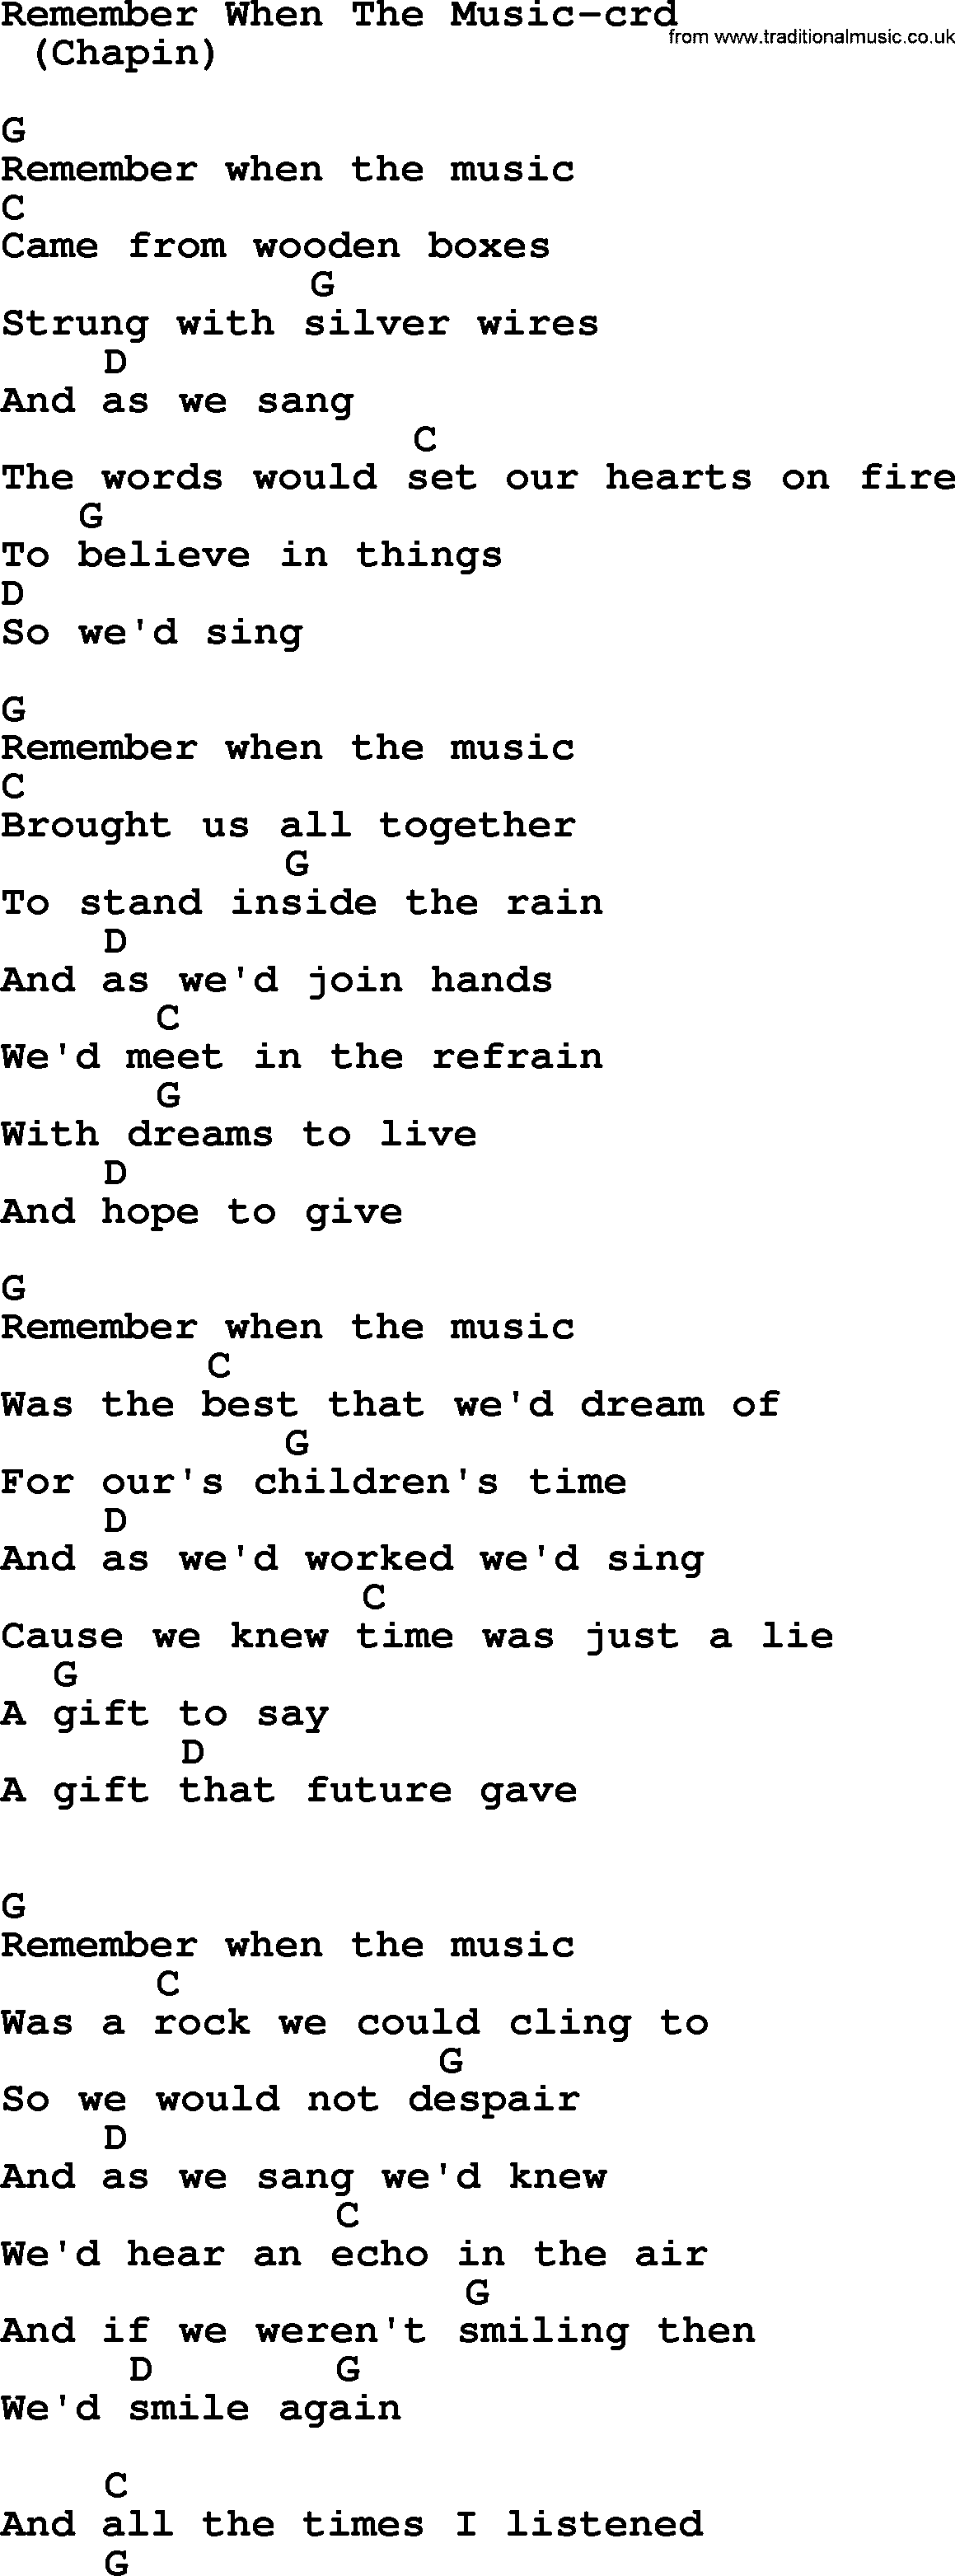 Bruce Springsteen song: Remember When The Music, lyrics and chords